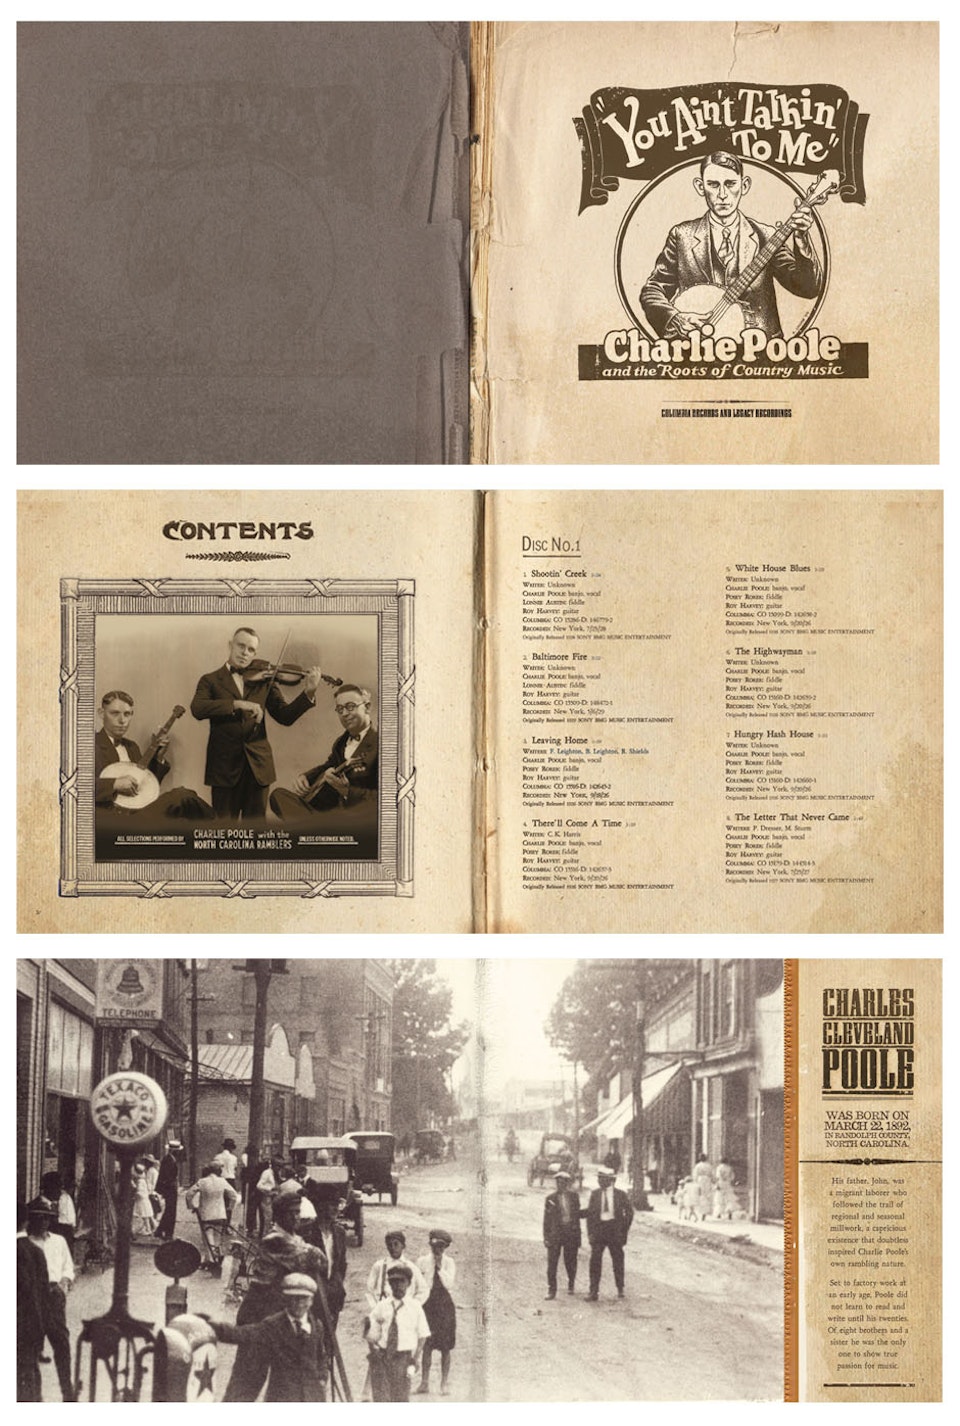 Grammy Nominated Charlie Poole You Ain’t Talkin’ To Me Box Set - Booklet spreads